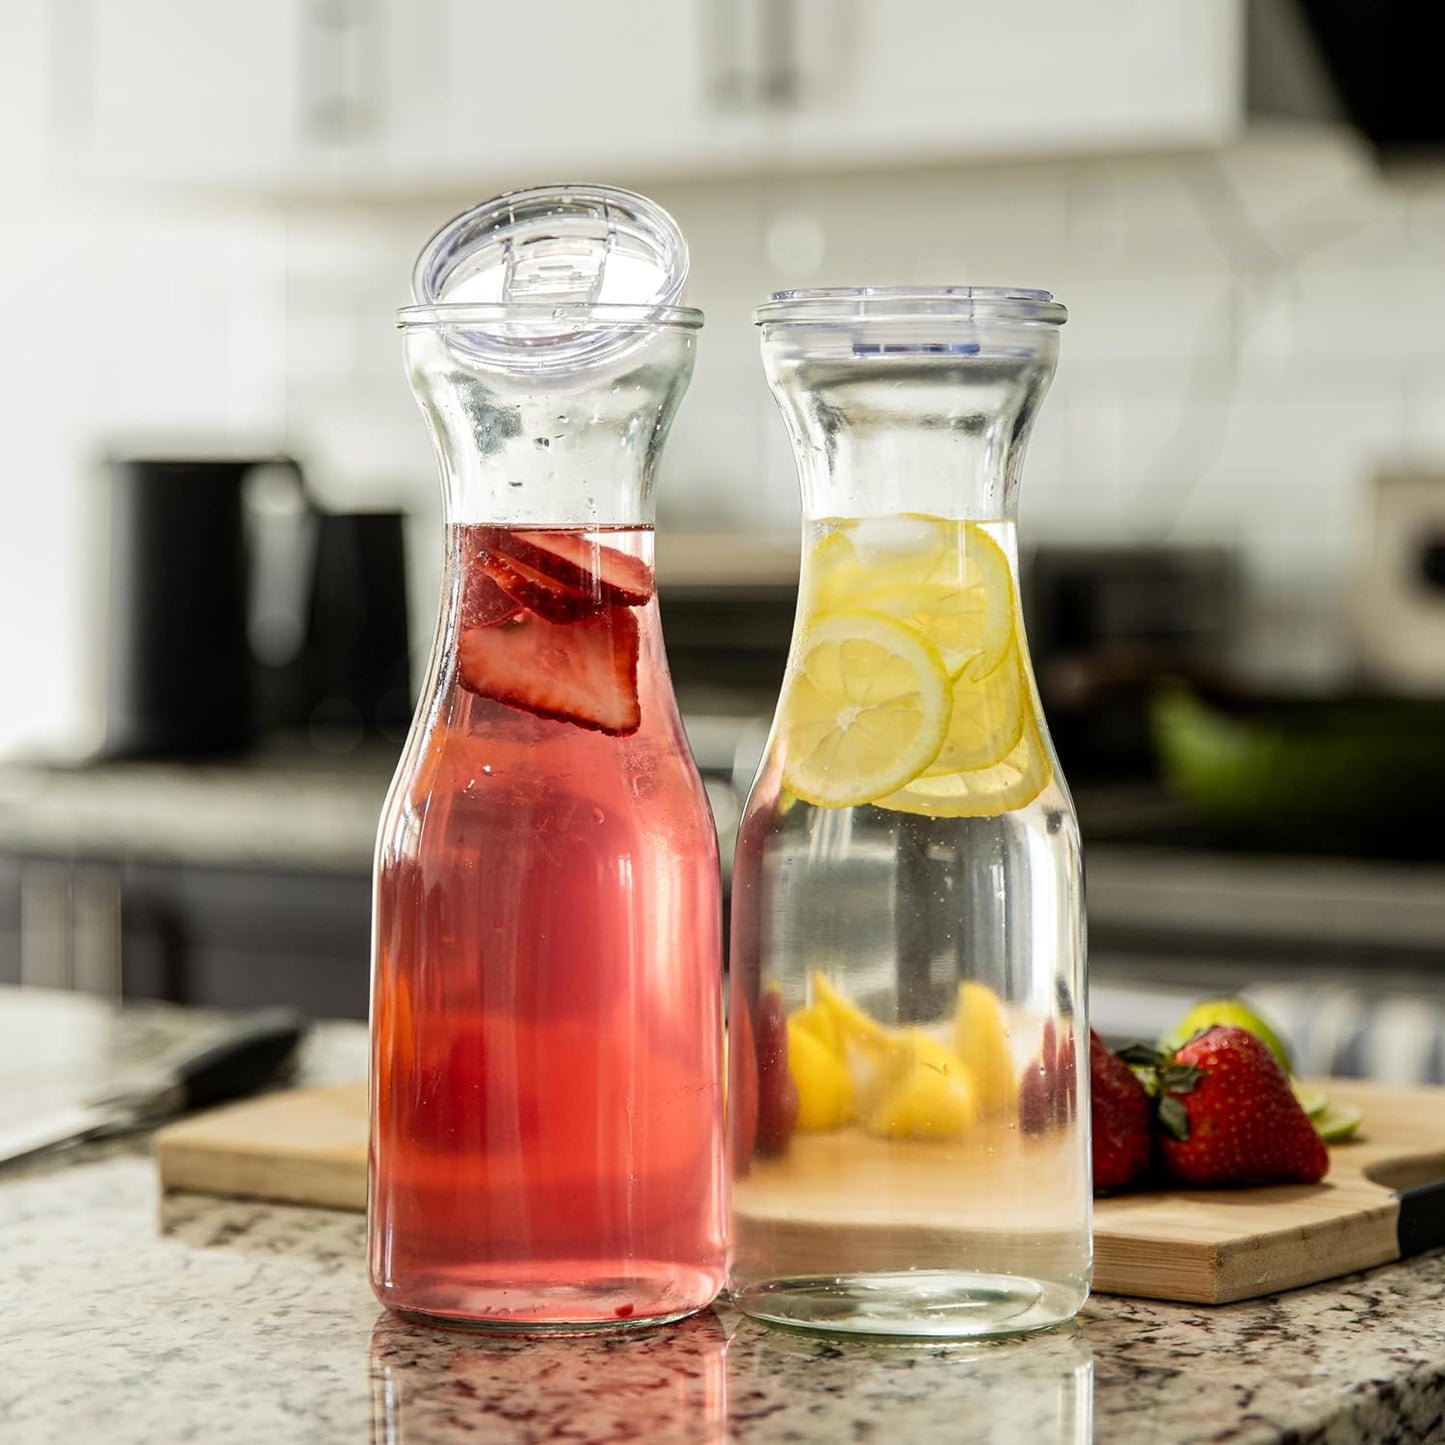 AYL Set of 4 Glass Carafe with Lids, 1 Liter Water Pitcher Beverage Serveware Carafe, Clear Glass Pitcher for Mimosa Bar, Cold Water, Brunch, Wine, Juice, Milk, Iced Tea, Lemonade,1 Hand Pour Lid